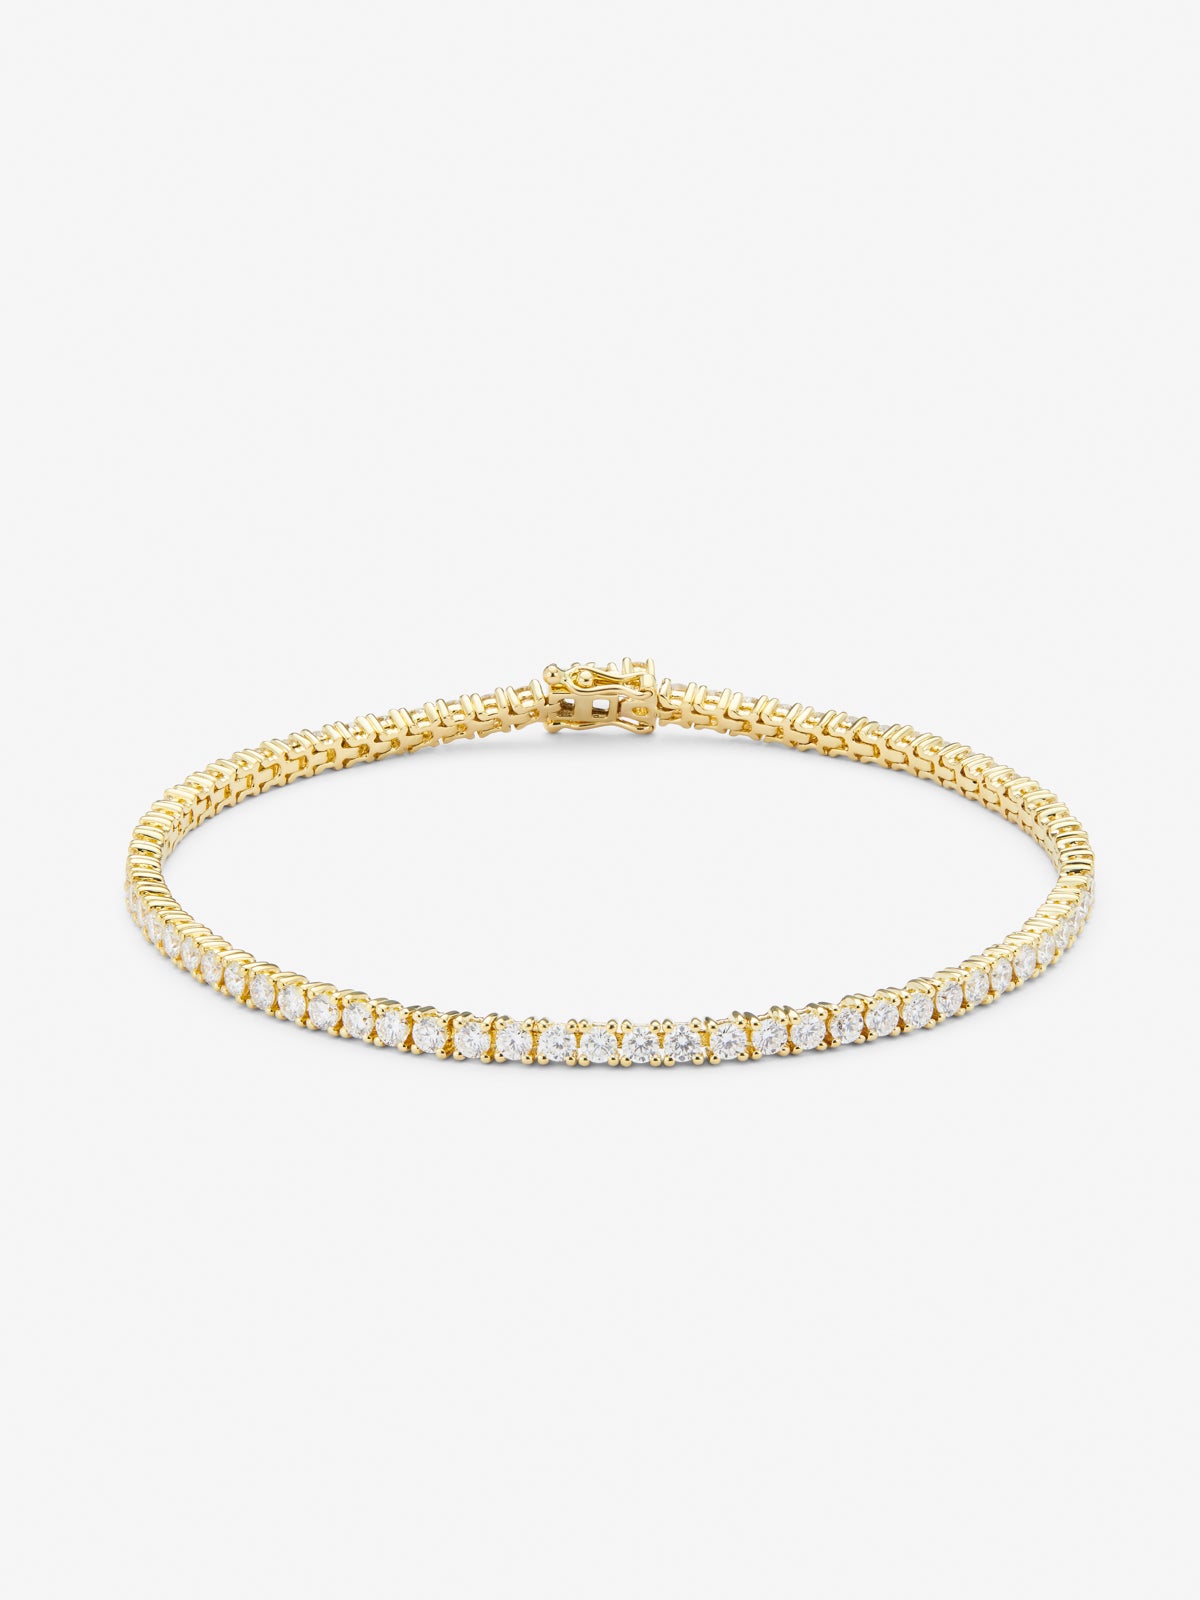 18K yellow gold rivière bracelet with bright type size of 3.11 cts